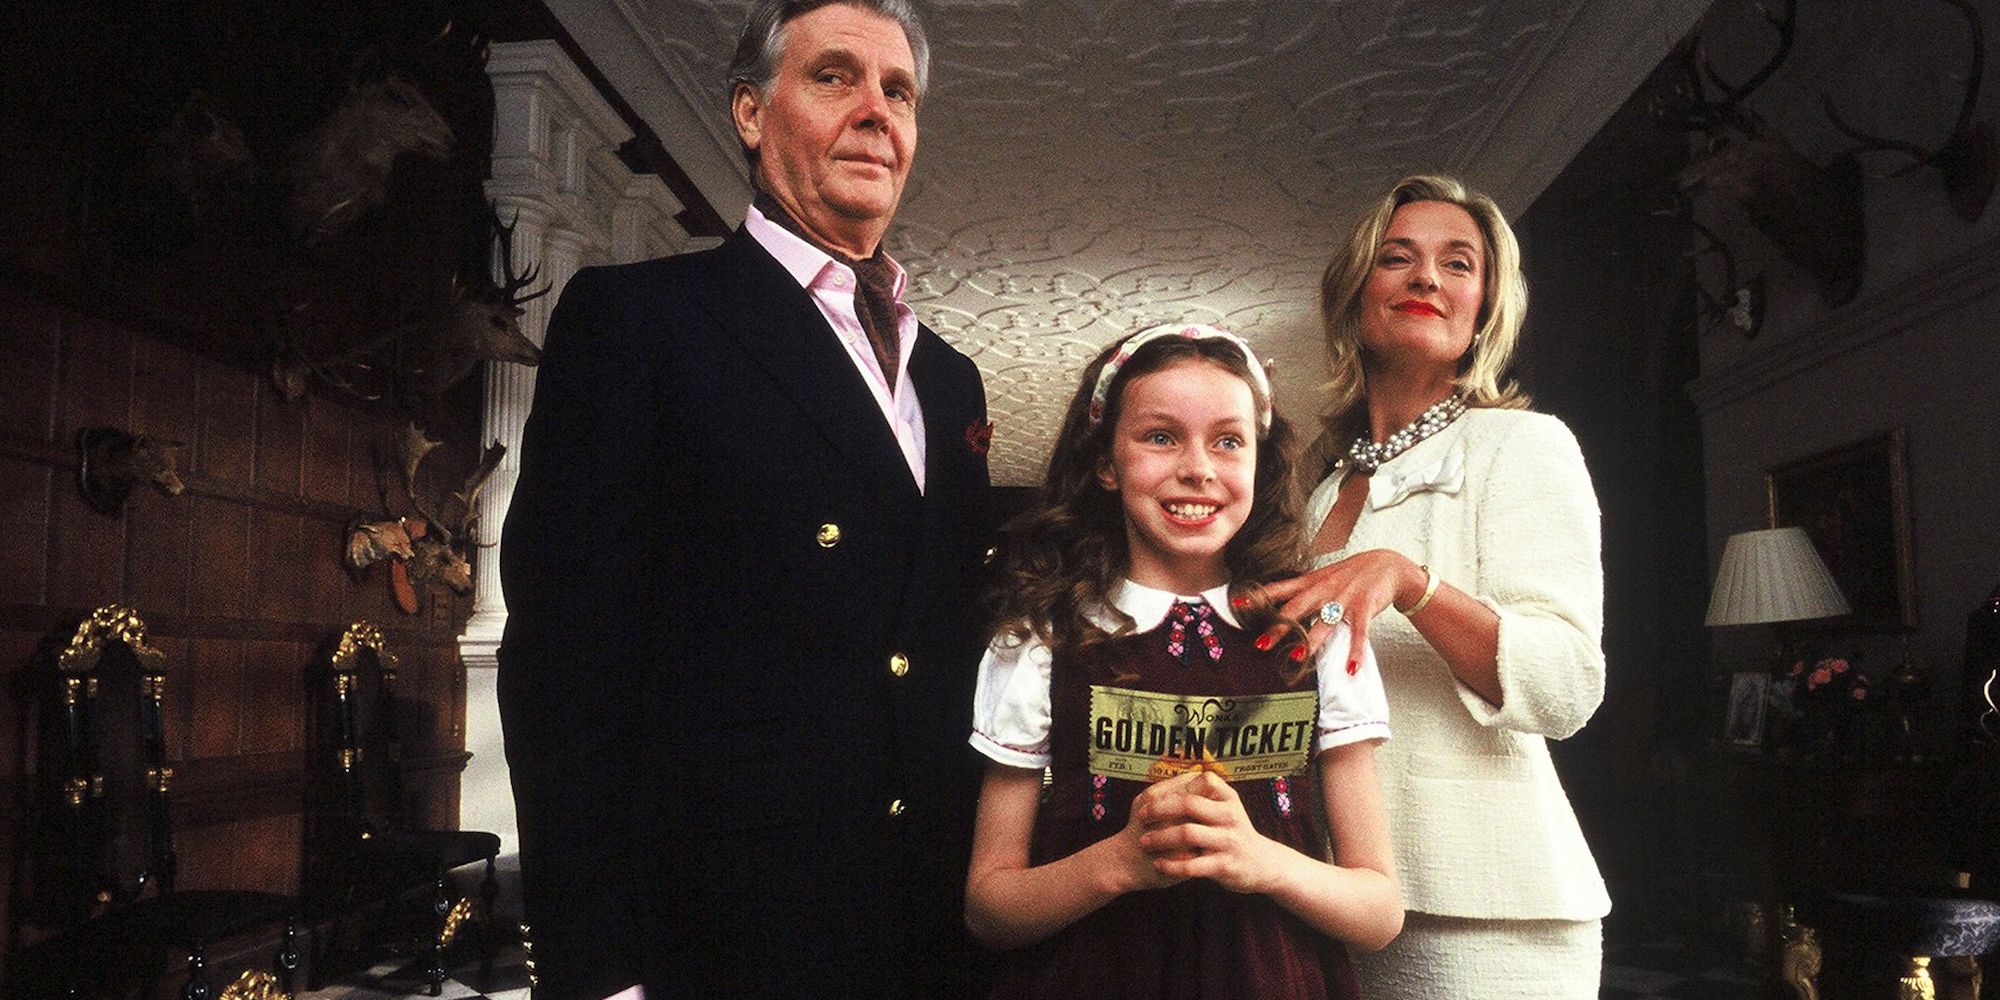 Veruca Salt with her parents in Charlie and the Chocolate Factory (2005)